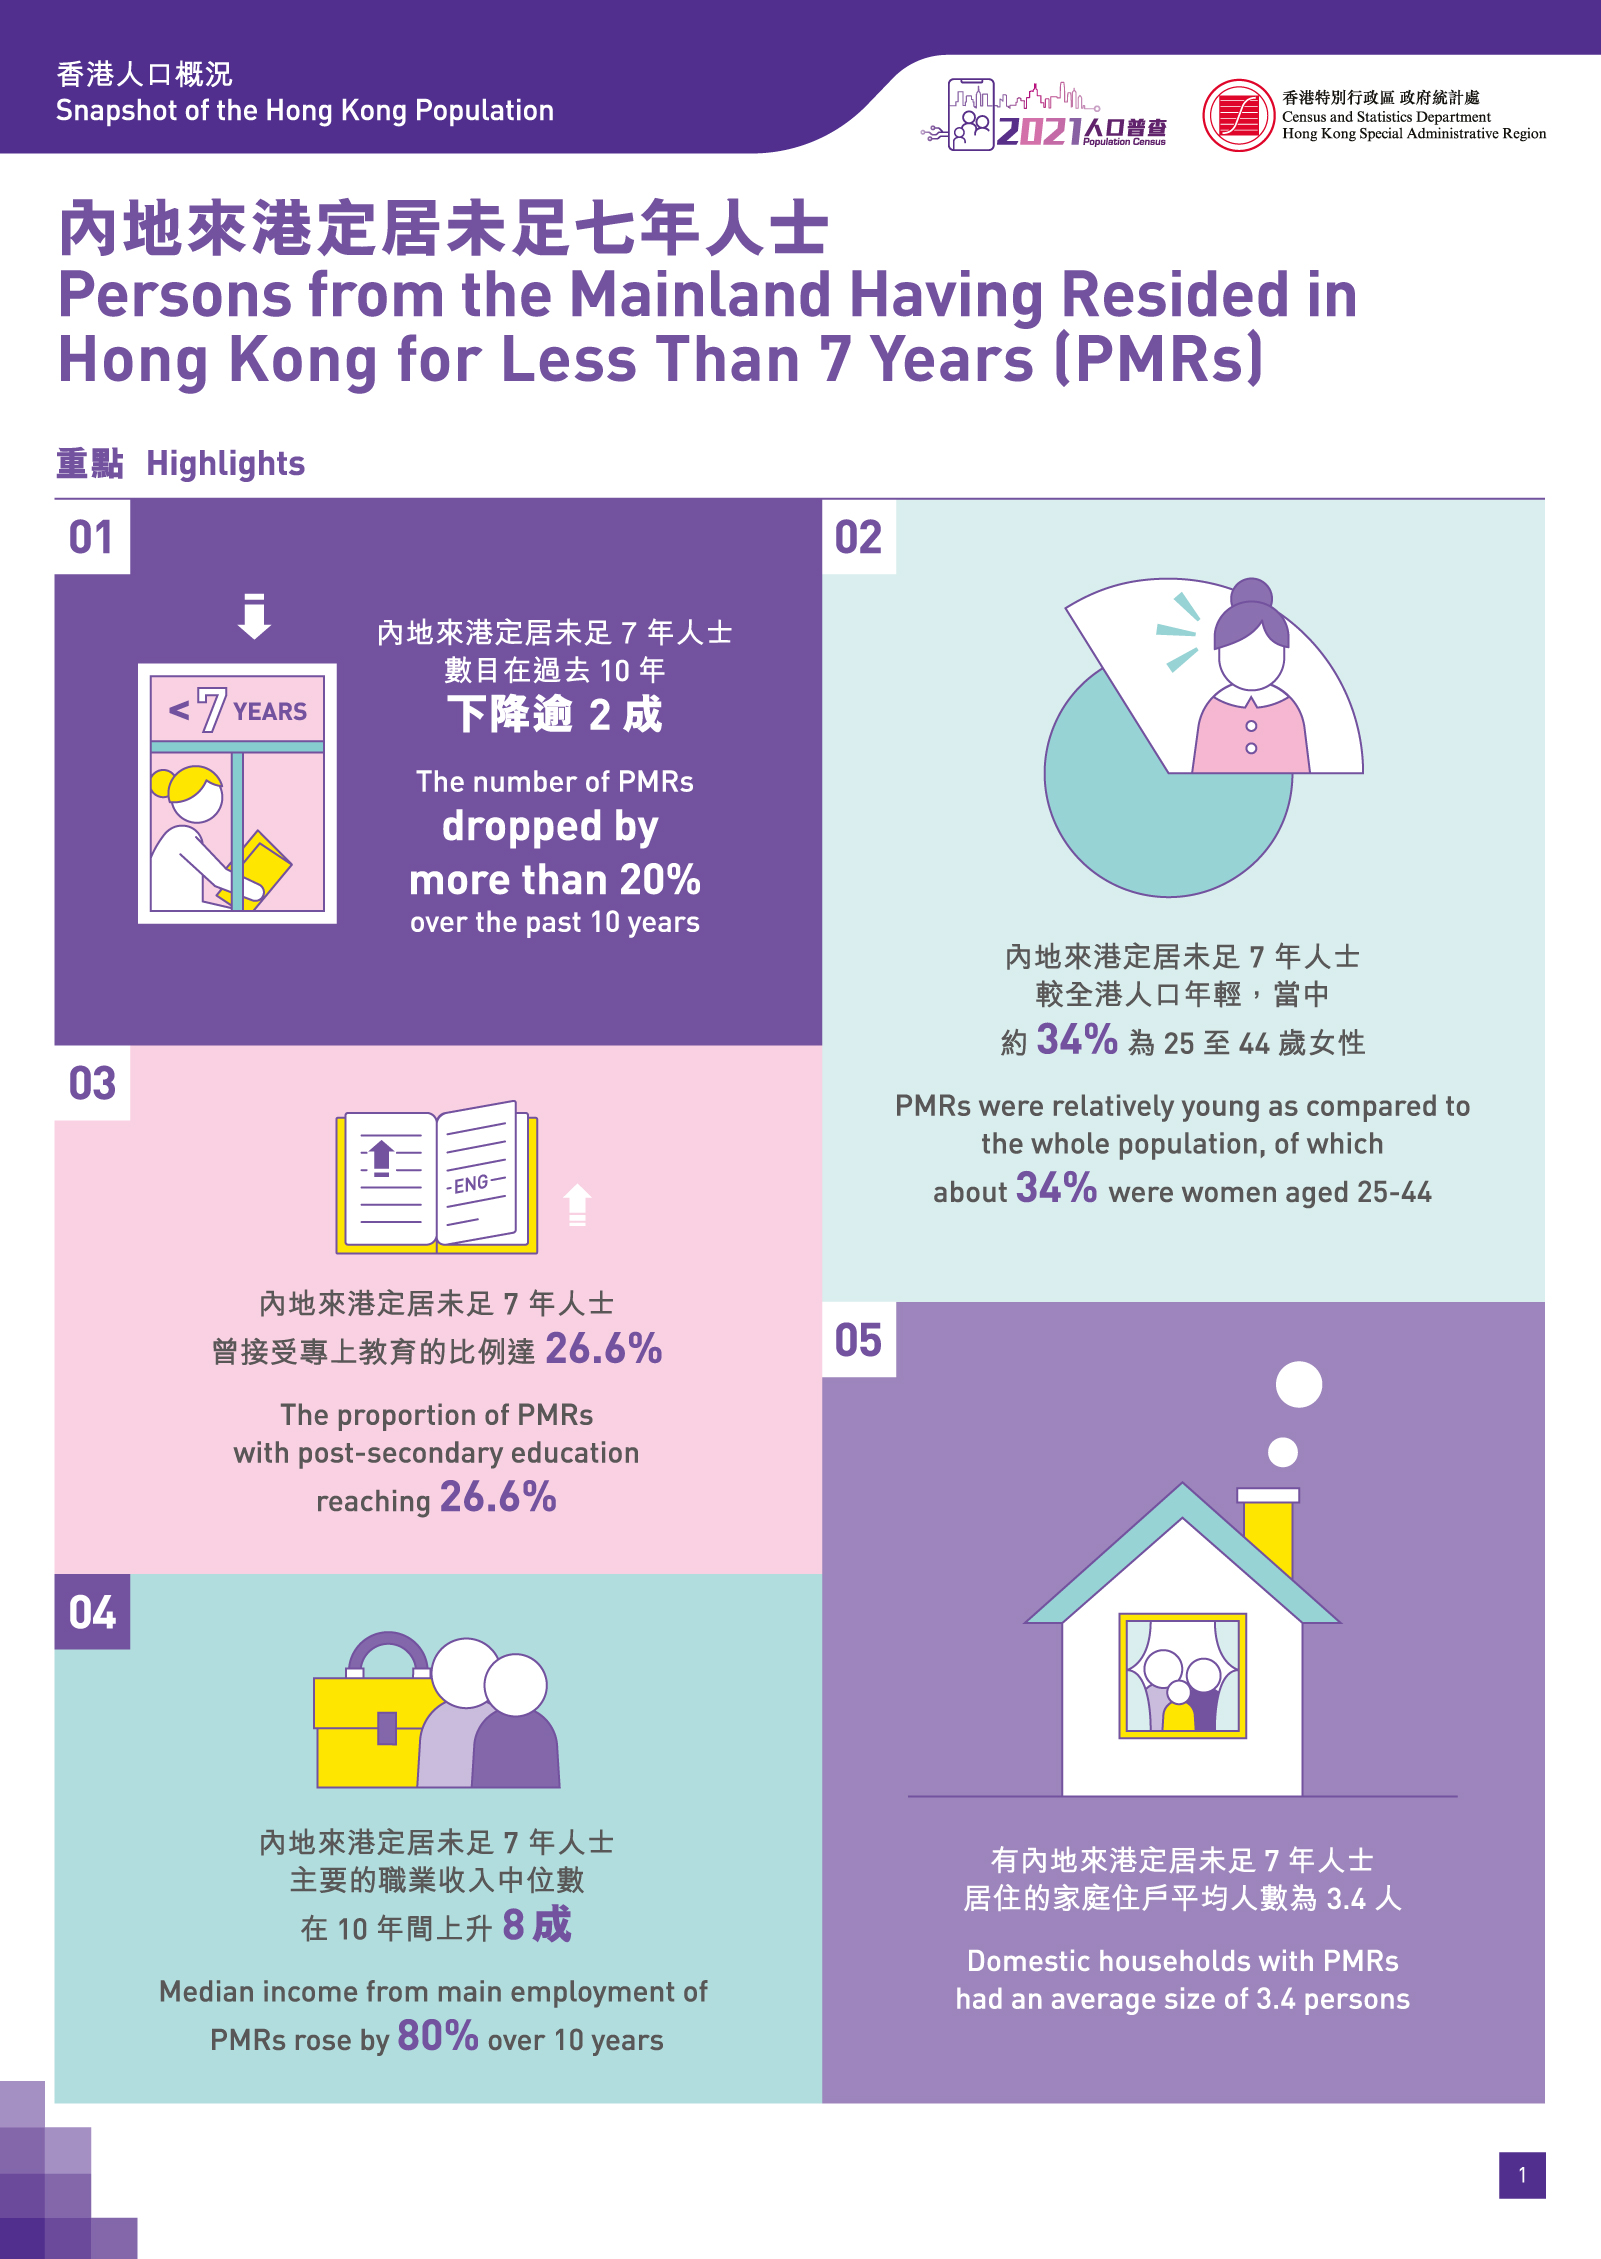 Persons from the Mainland Having Resided in Hong Kong for Less Than 7 Years